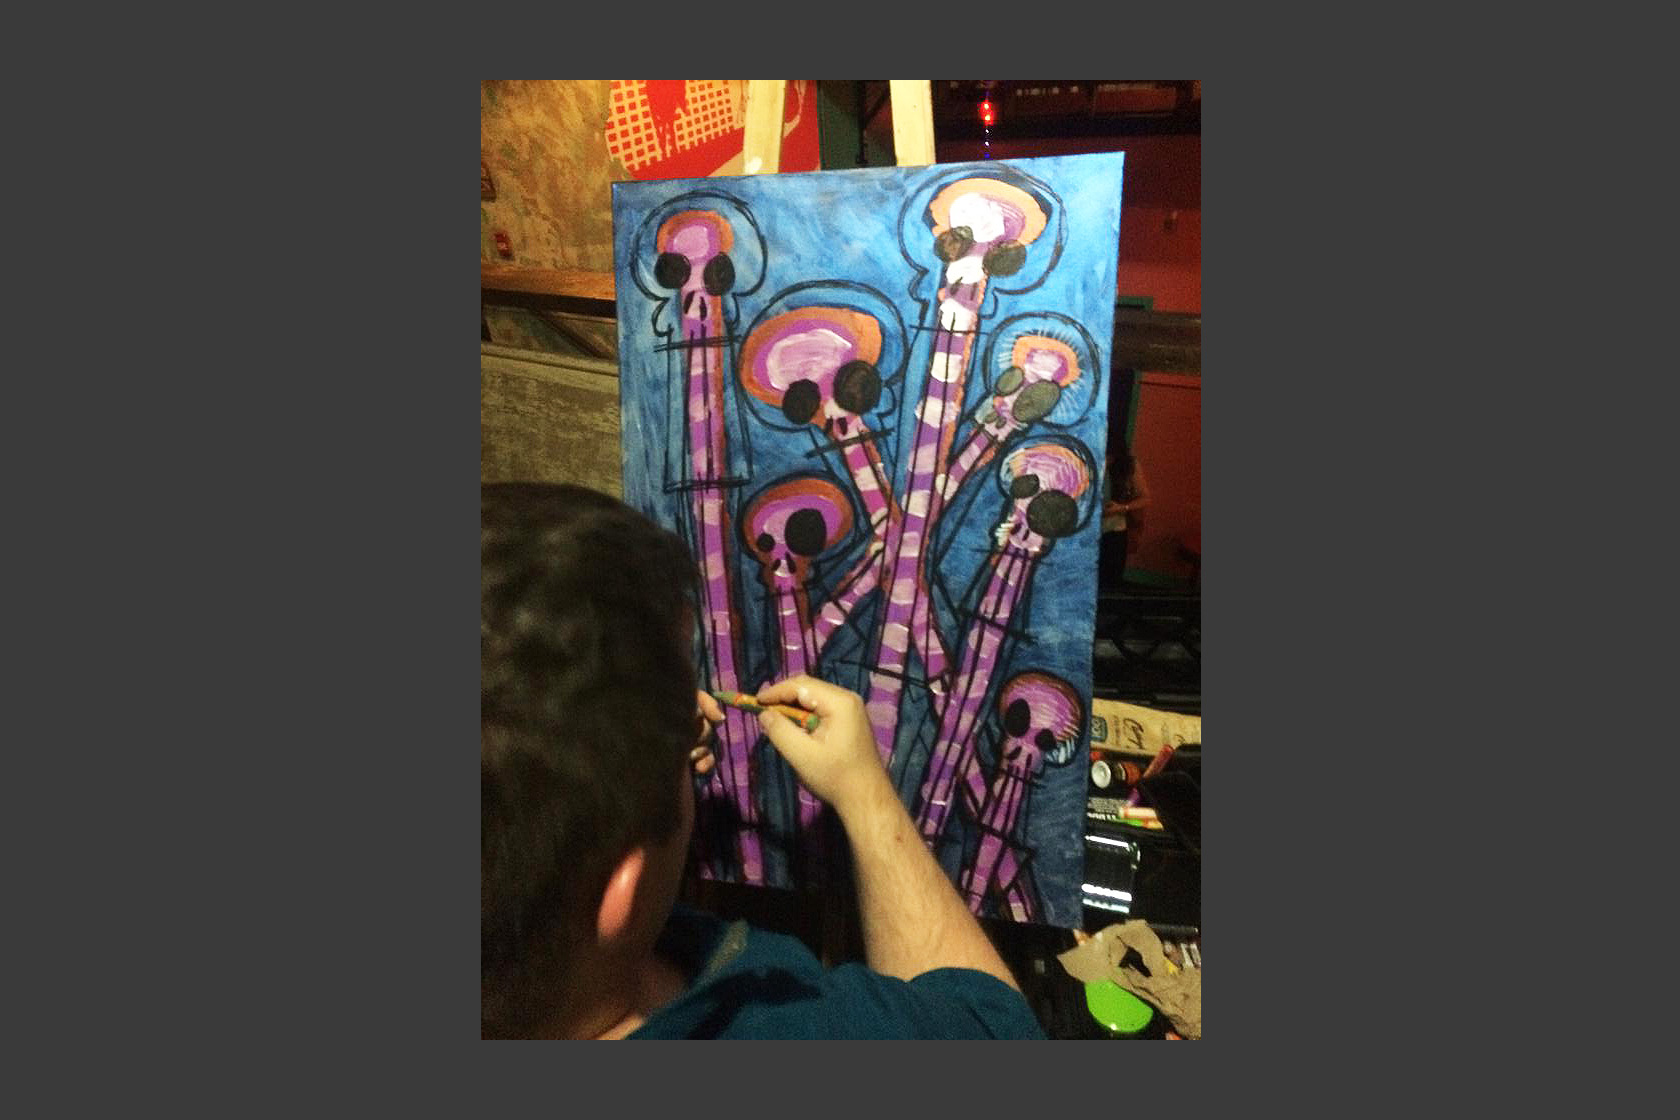 Live Painting Performance, Pacific Junction Hotel, June 6 2015